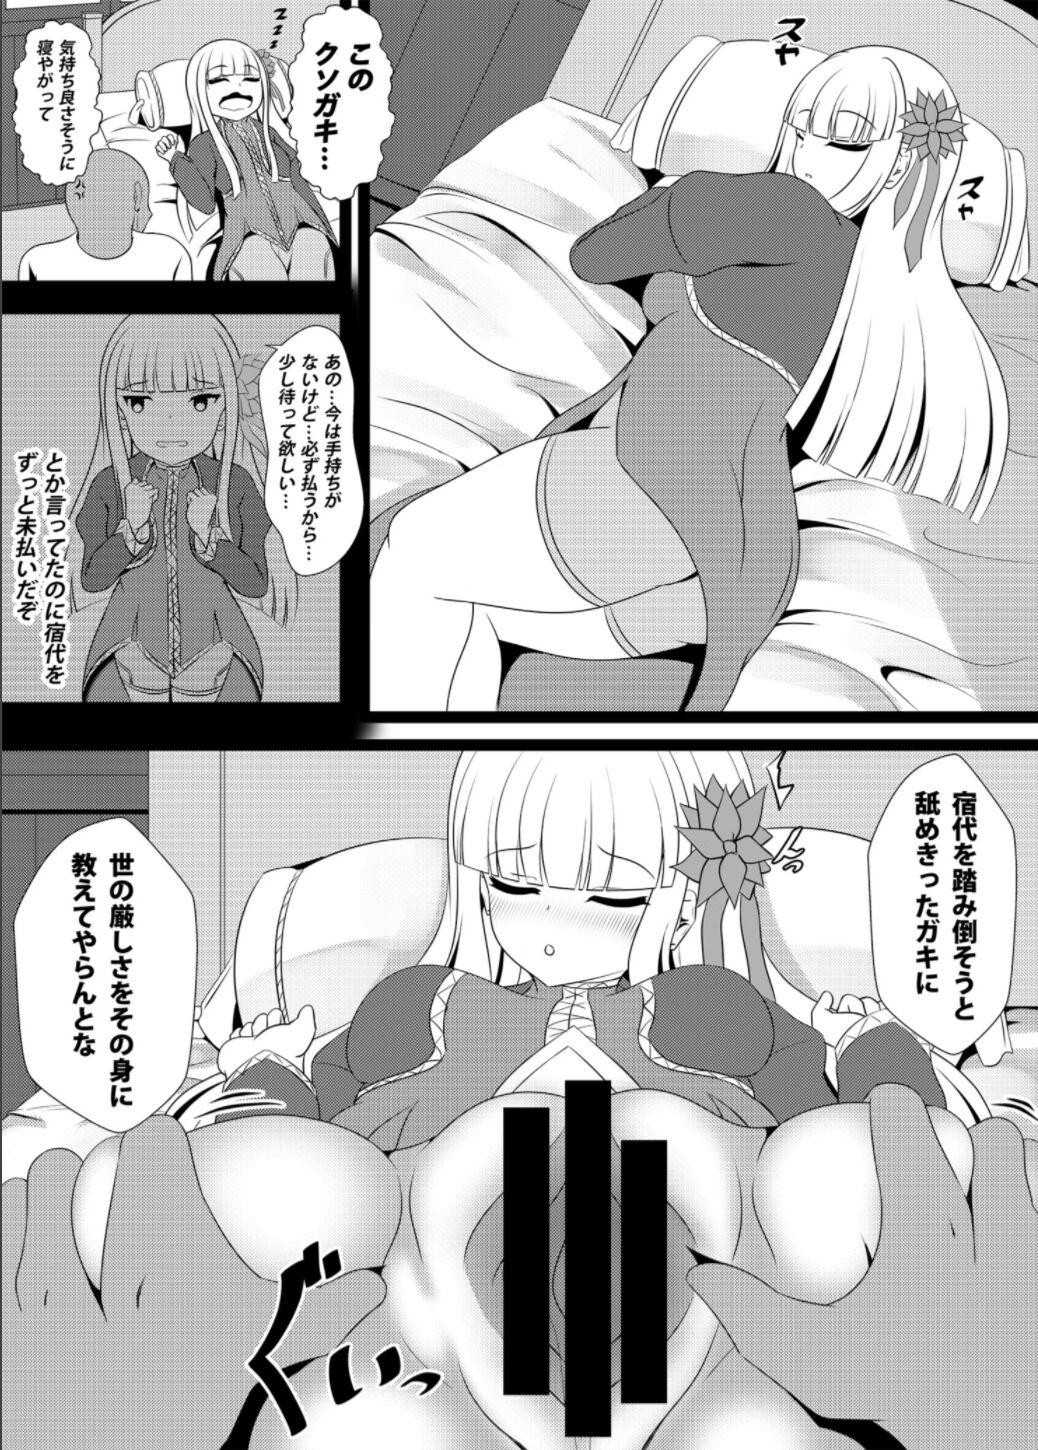 Ass Fucked Mabel Was Attacked - Isekai ojisan Usa - Page 2